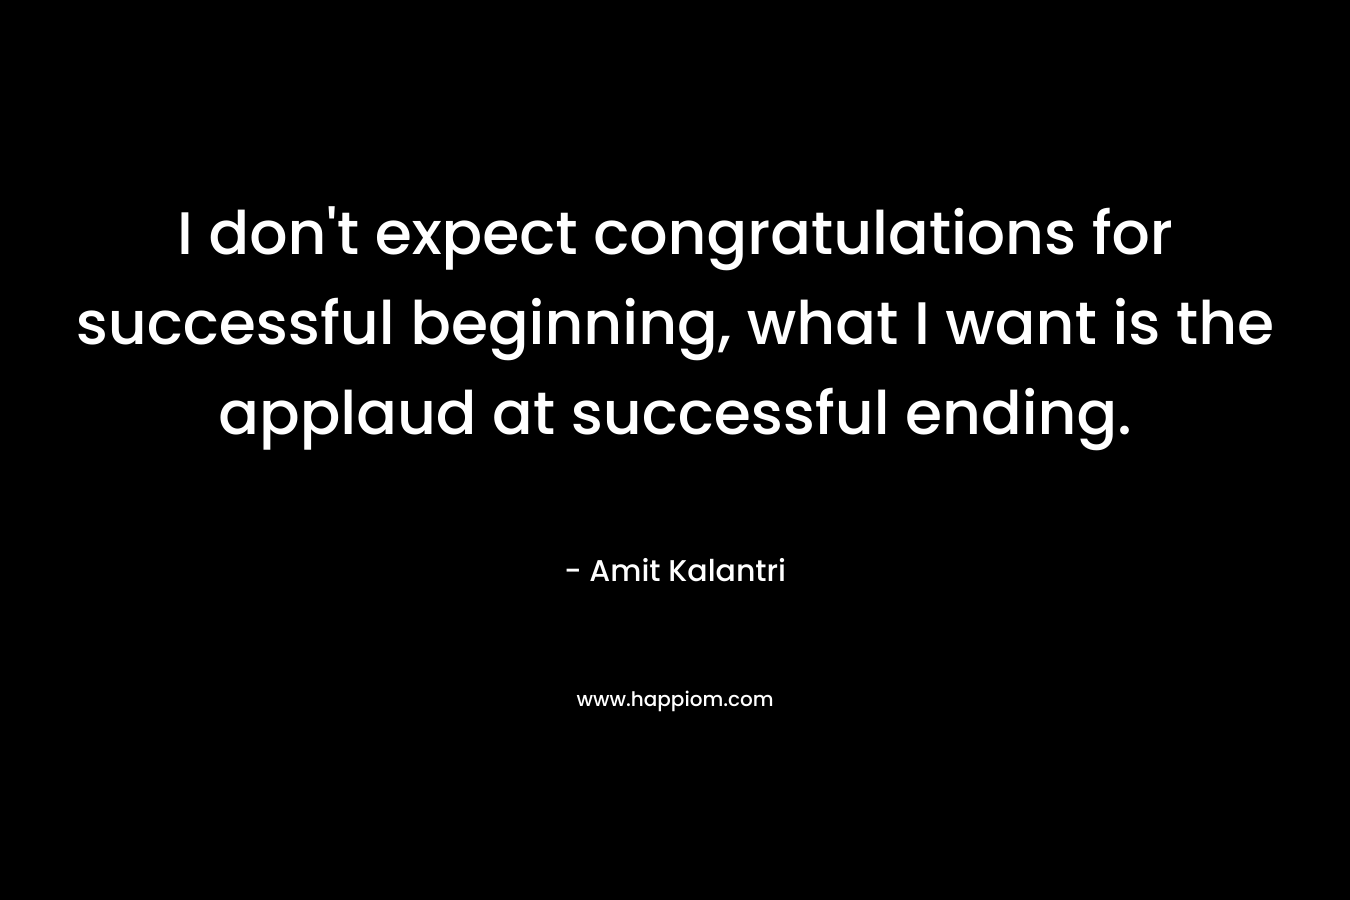 I don't expect congratulations for successful beginning, what I want is the applaud at successful ending.